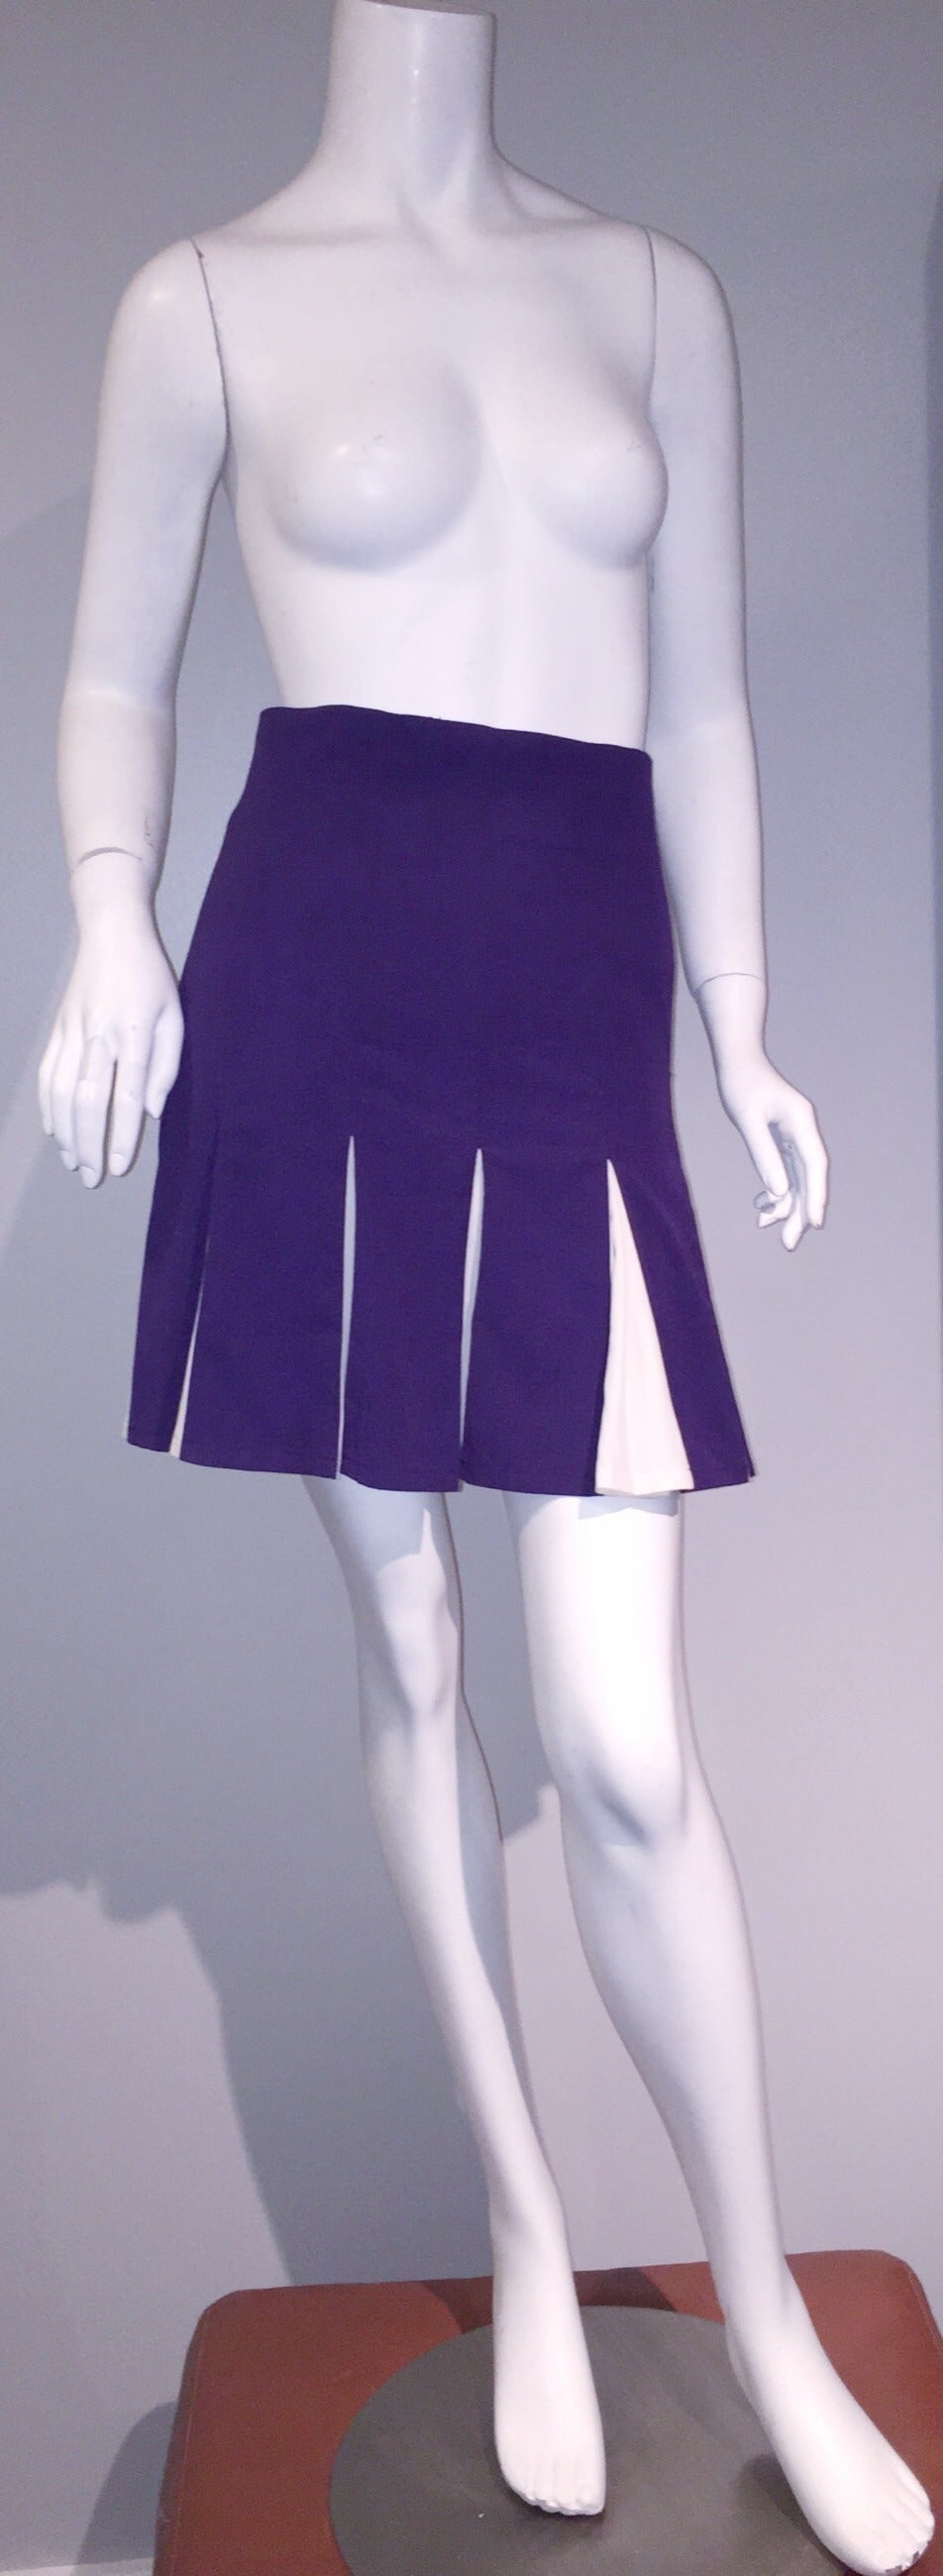 1990s Plein Sud High Waisted Purple + White Pleated Skirt - Made in France 1